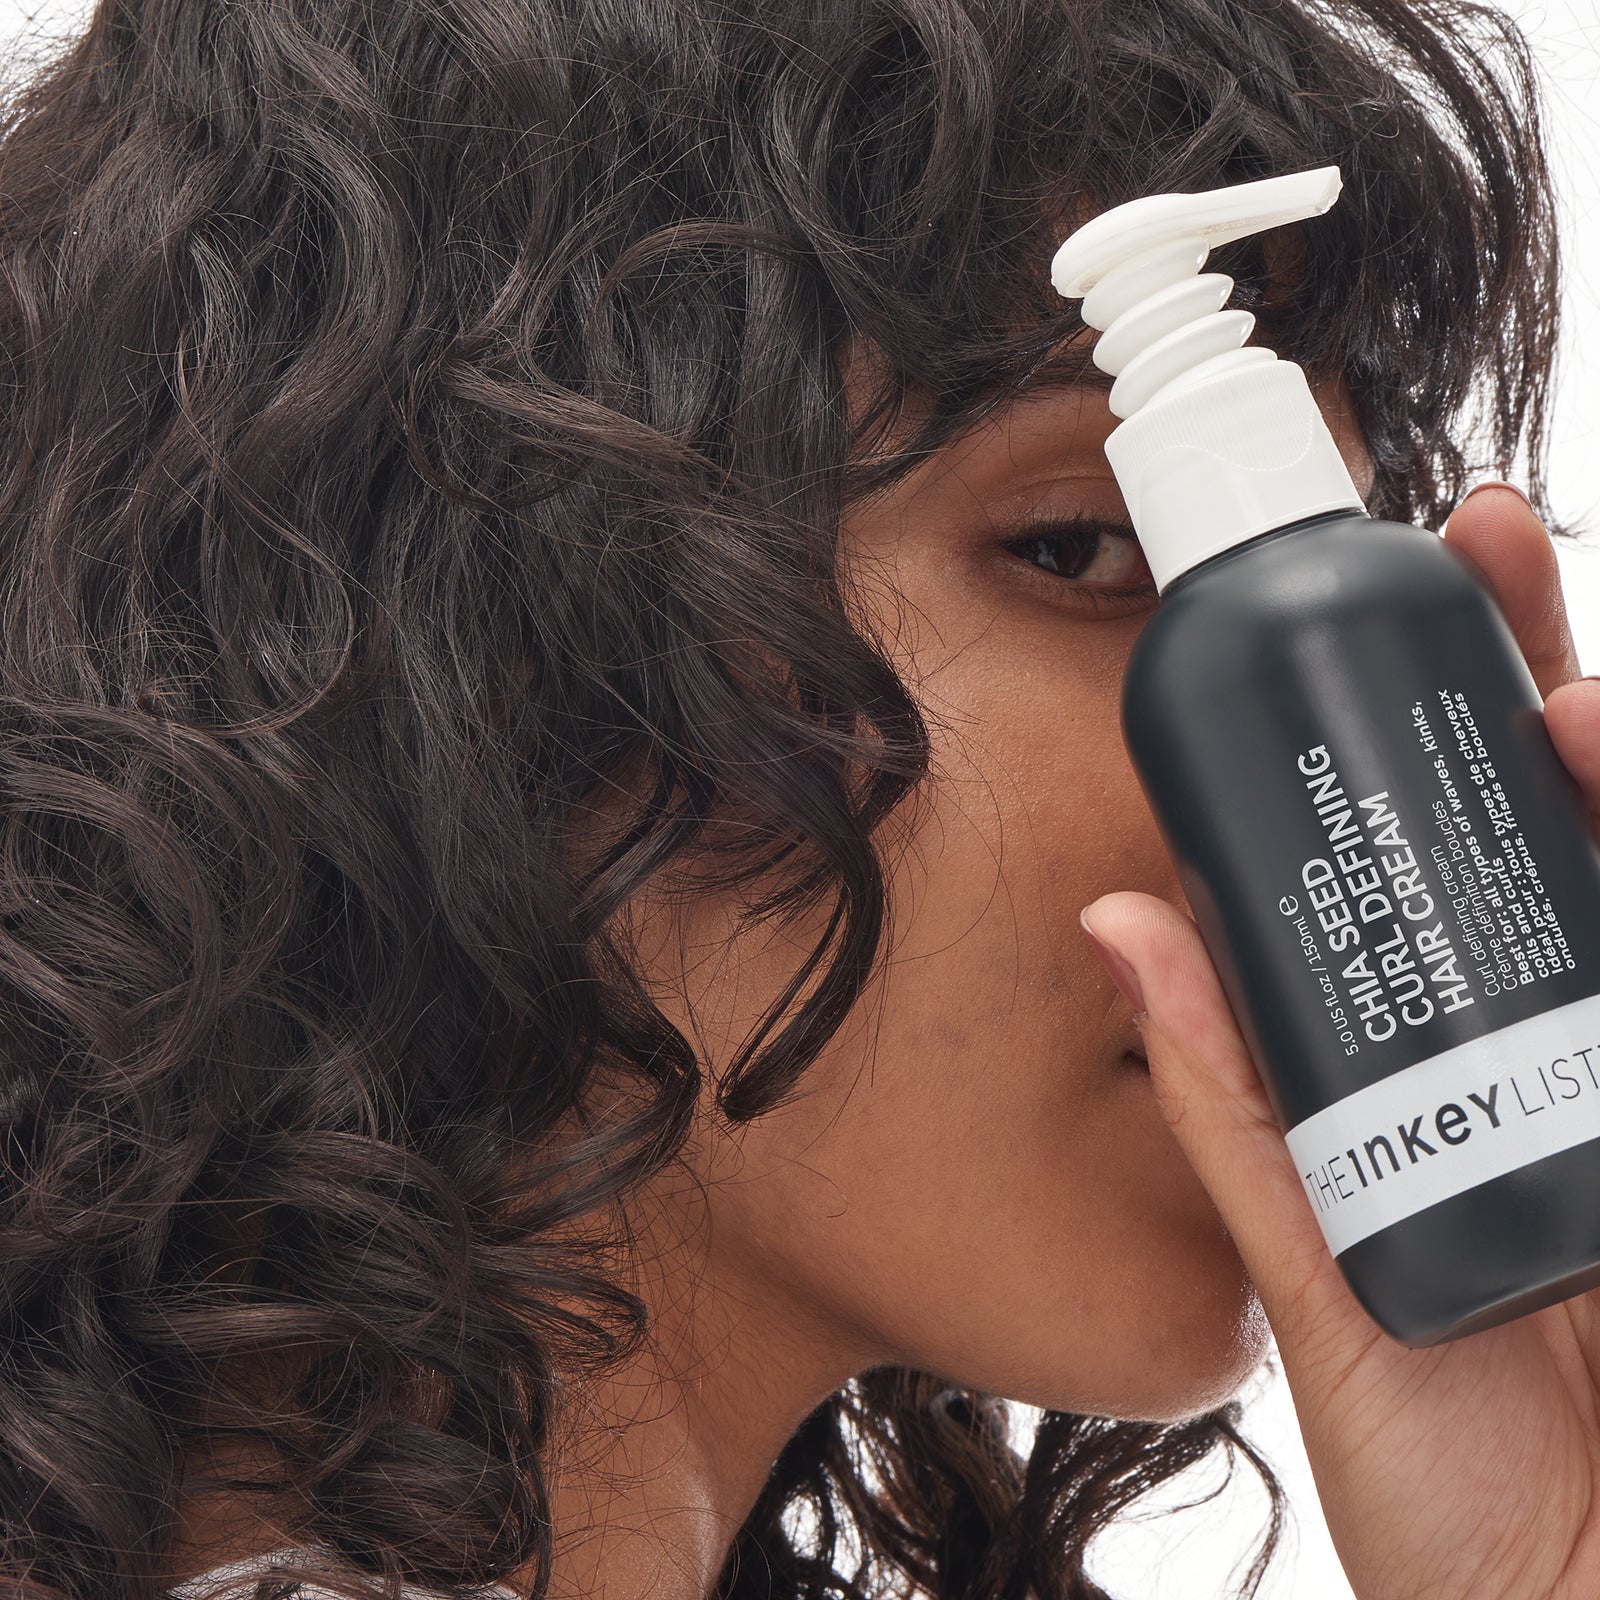 Model holding a bottle of the Chia seed curl defining hair treatment